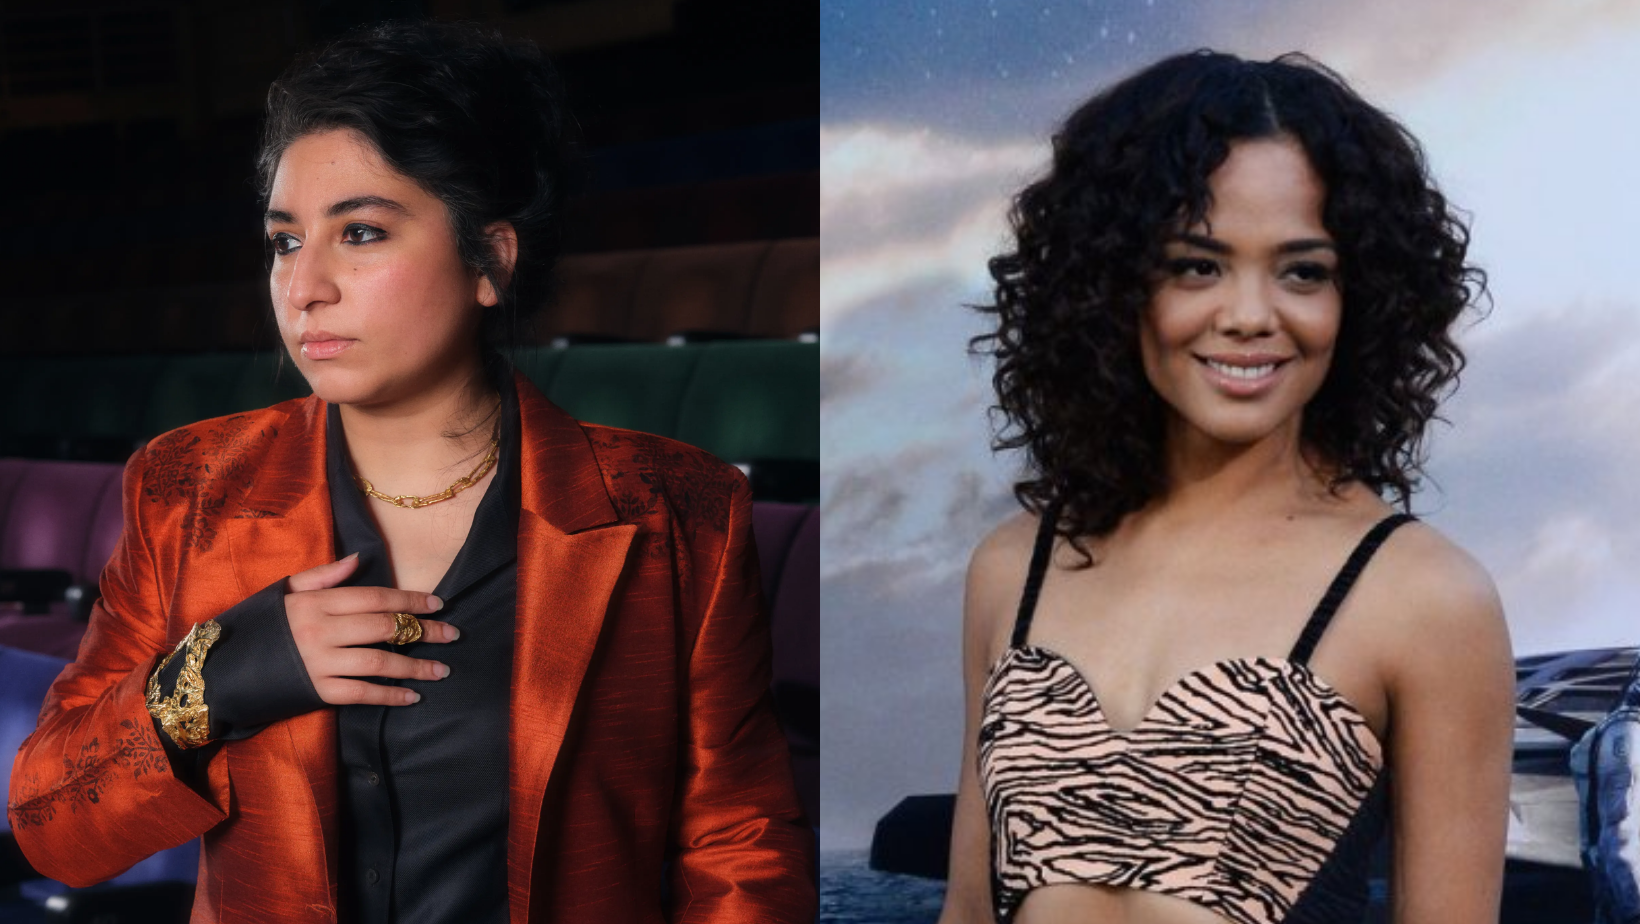 Mohabbat Crooner Arooj Aftab Teams Up With Thor Star Tessa Thompson For First Music Video 49179